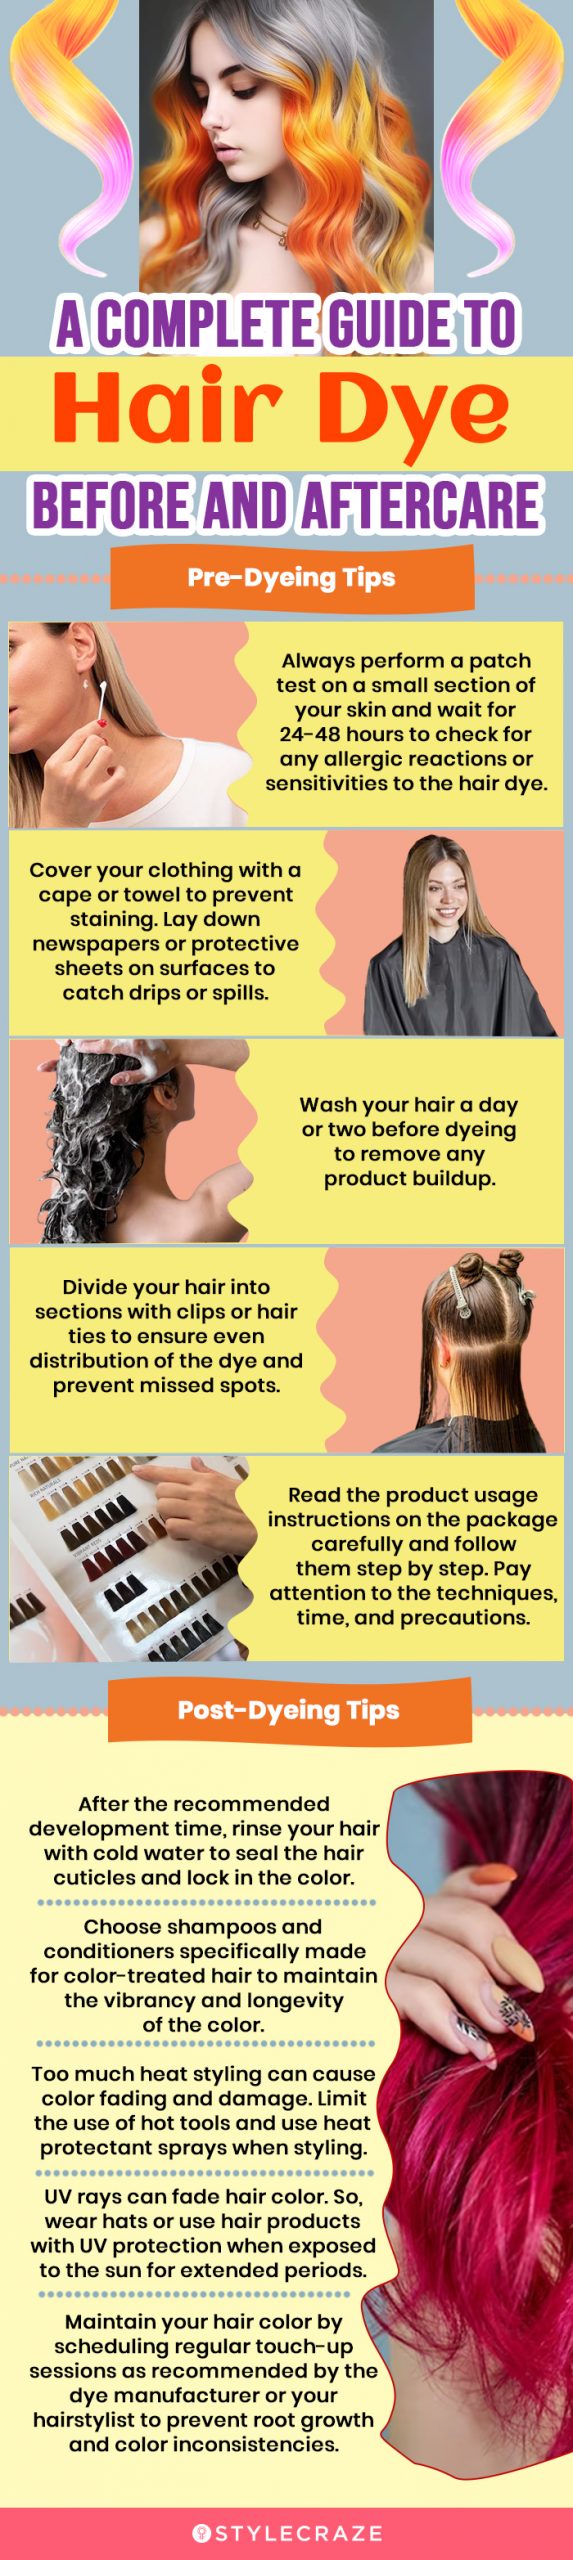 A Complete Guide To Hair Dye Before And Aftercare (infographic)